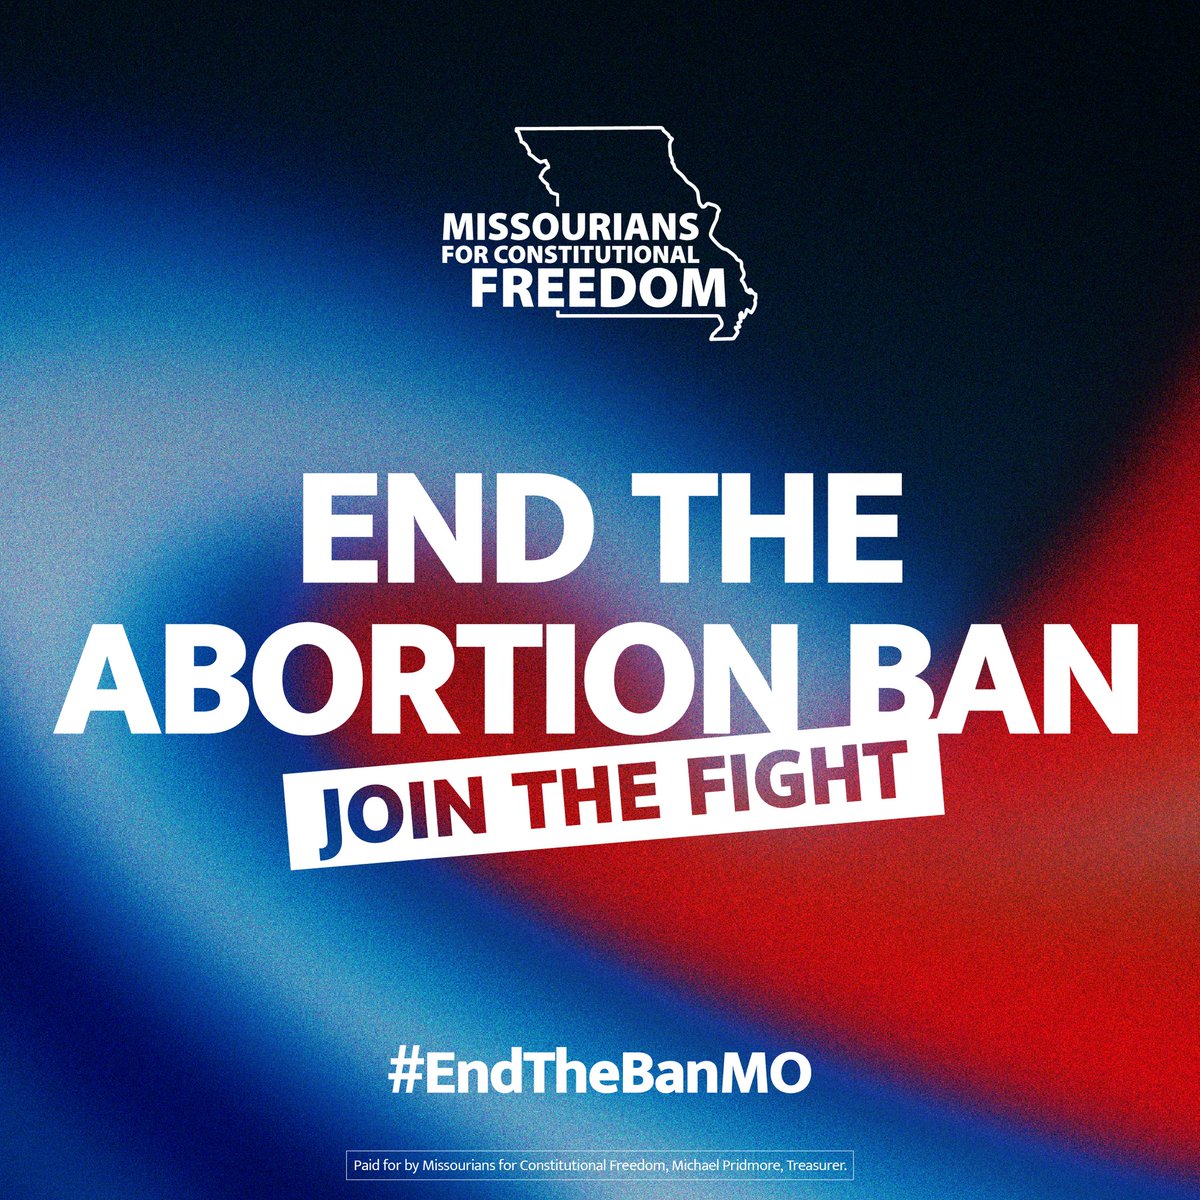 As Missourians, we overwhelmingly support the freedom to make our own medical decisions. But politicians want to control our lives and enforce one of the most cruel abortion bans. That's why @Missourians4CF is fighting to #EndTheBanMO